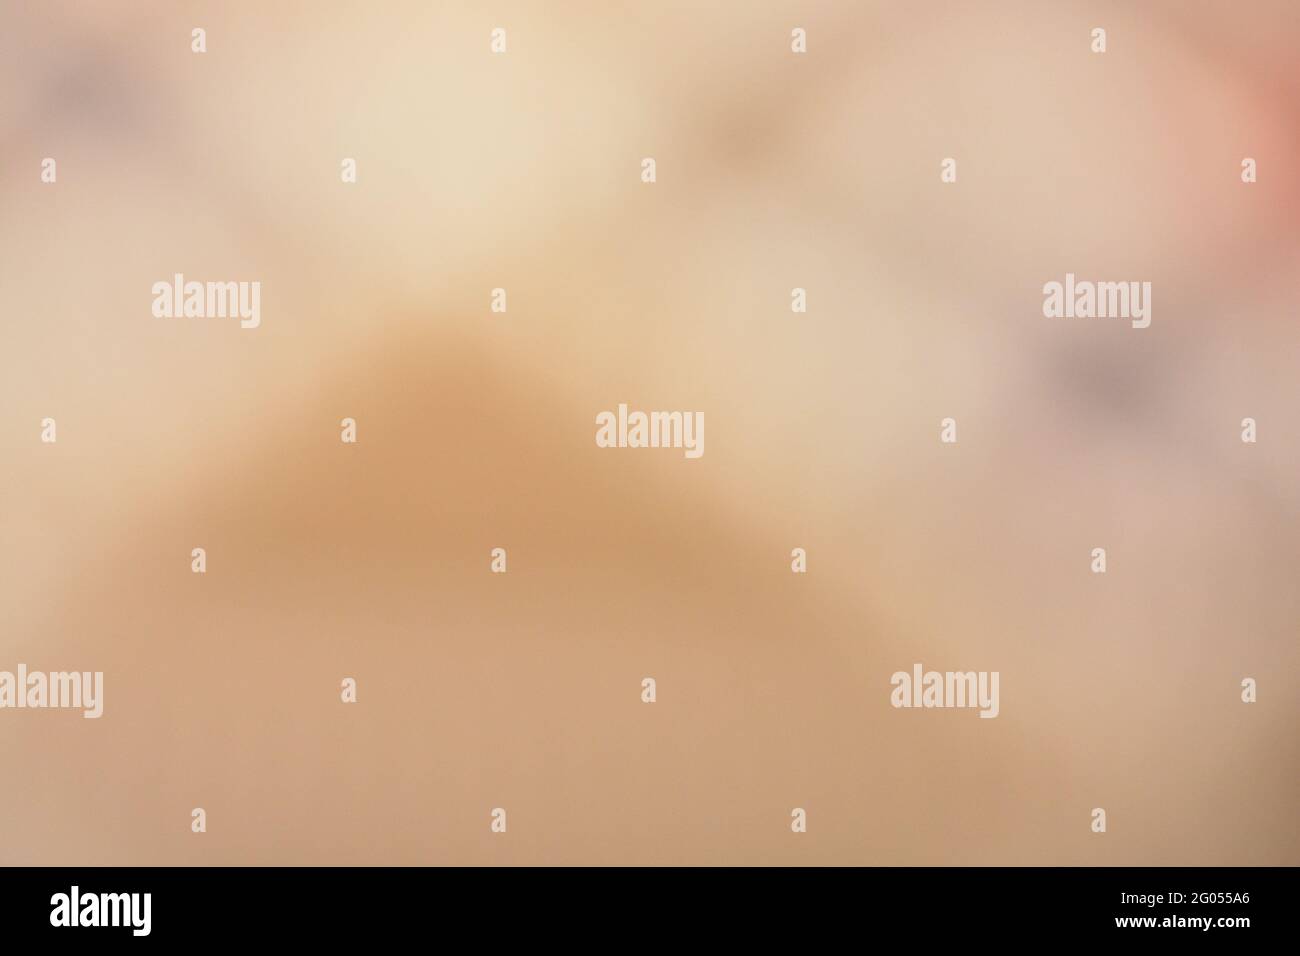 gradient brown background for wallpapers and graphic designs, blurred abstract brown gradient pastel light background smart blurred pattern. Stock Photo